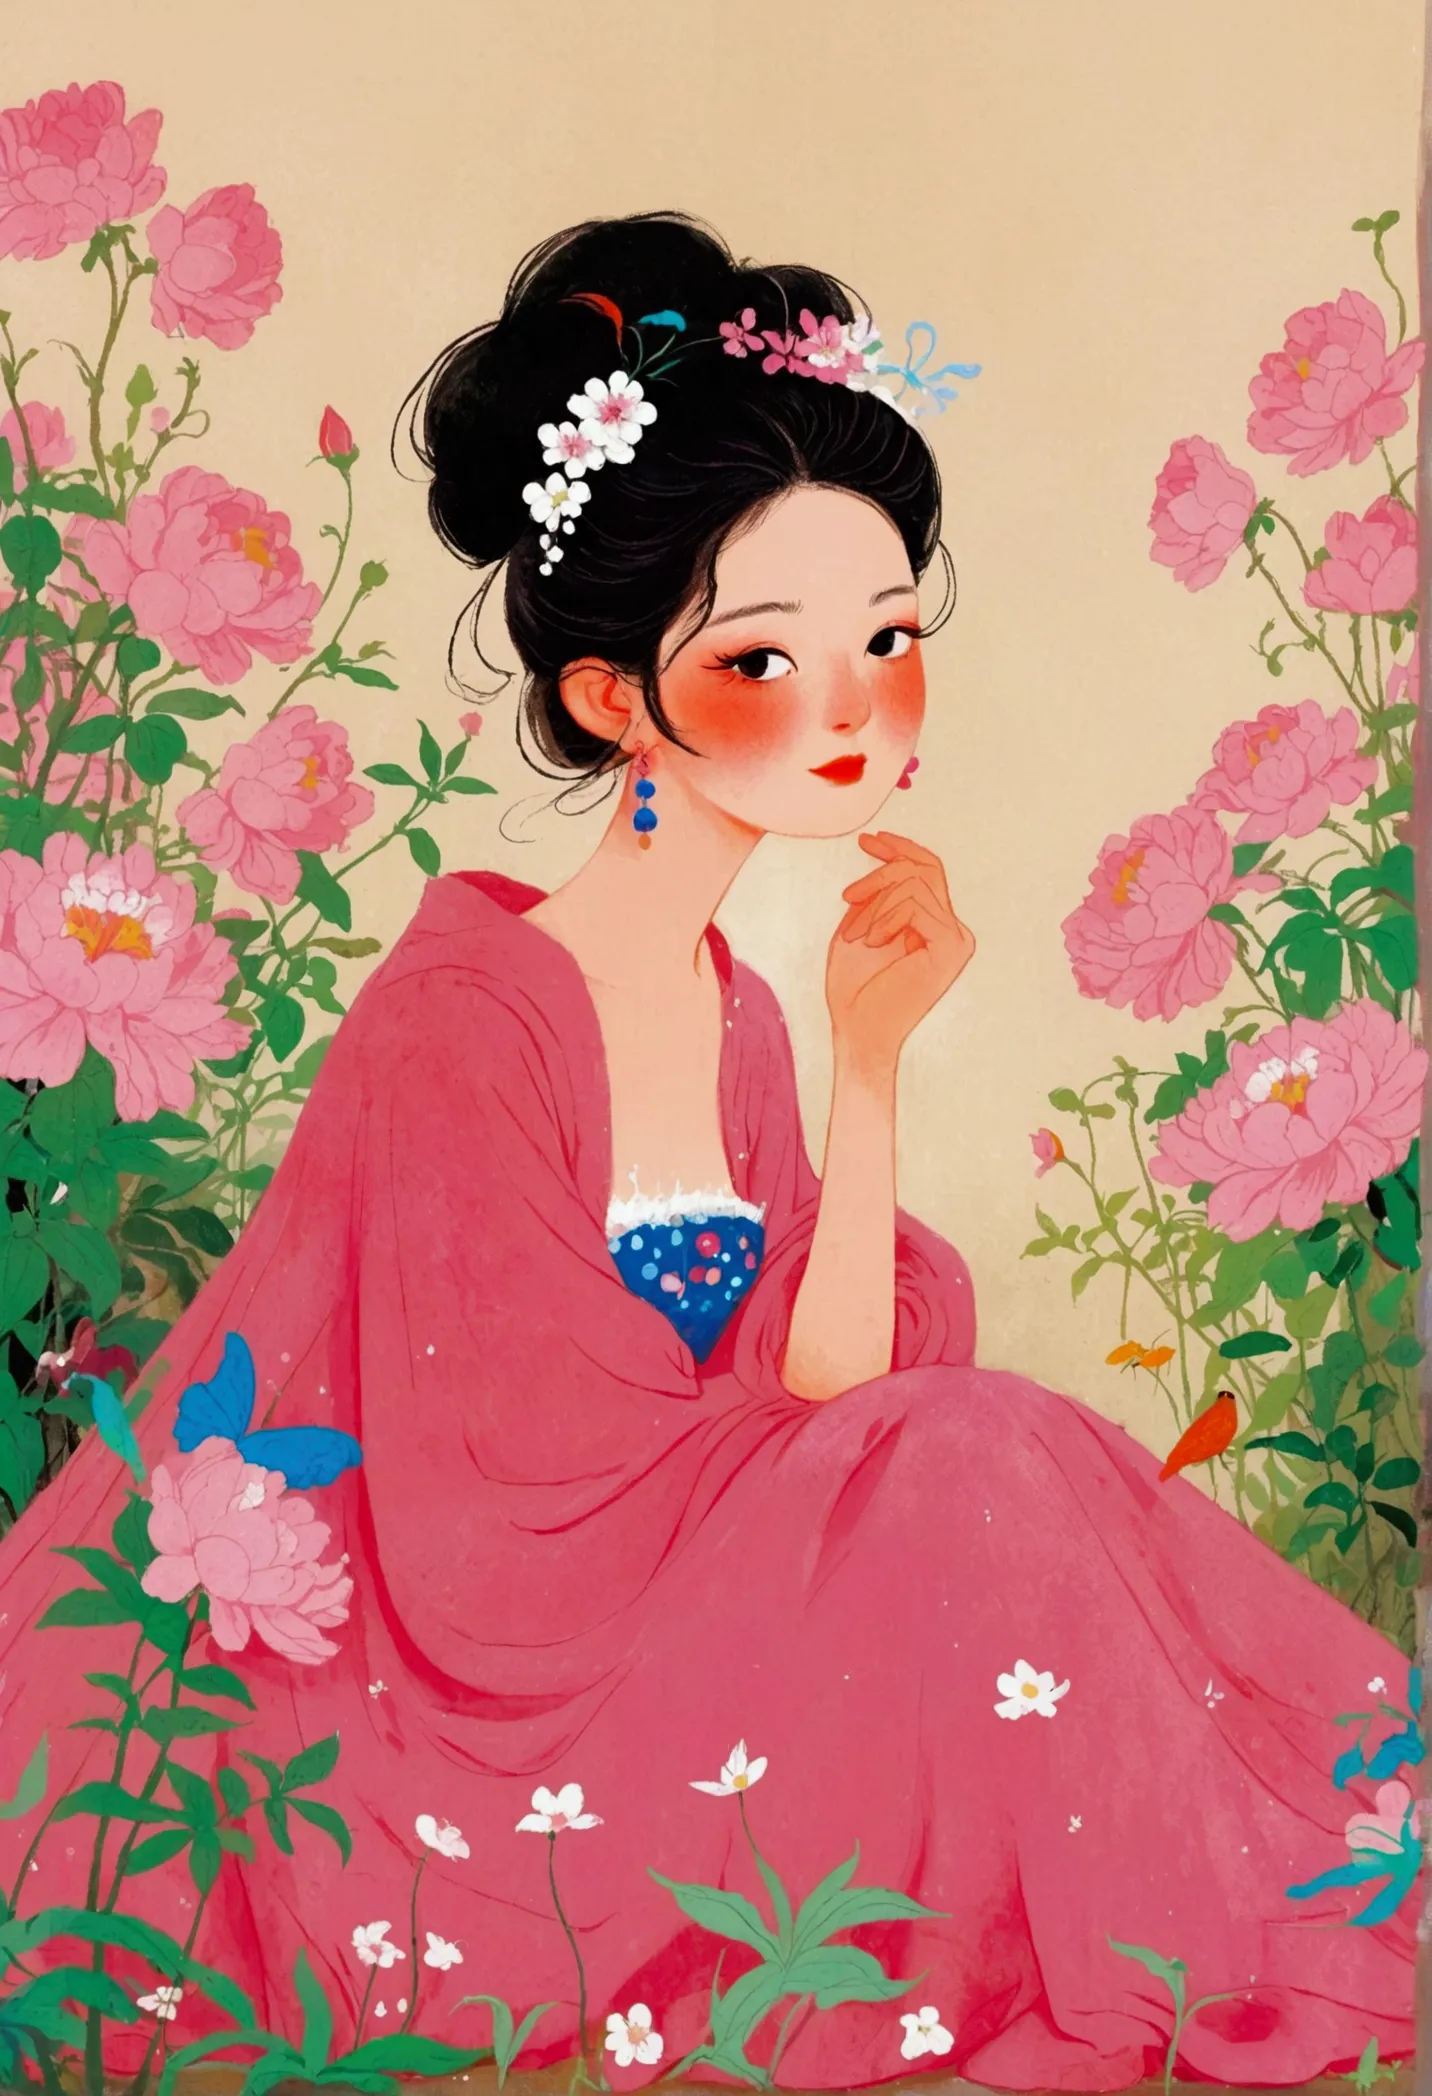 A woman in a pink dress sits among the flowers, Artworks similar to Sheng Lam, author：Gao Cen